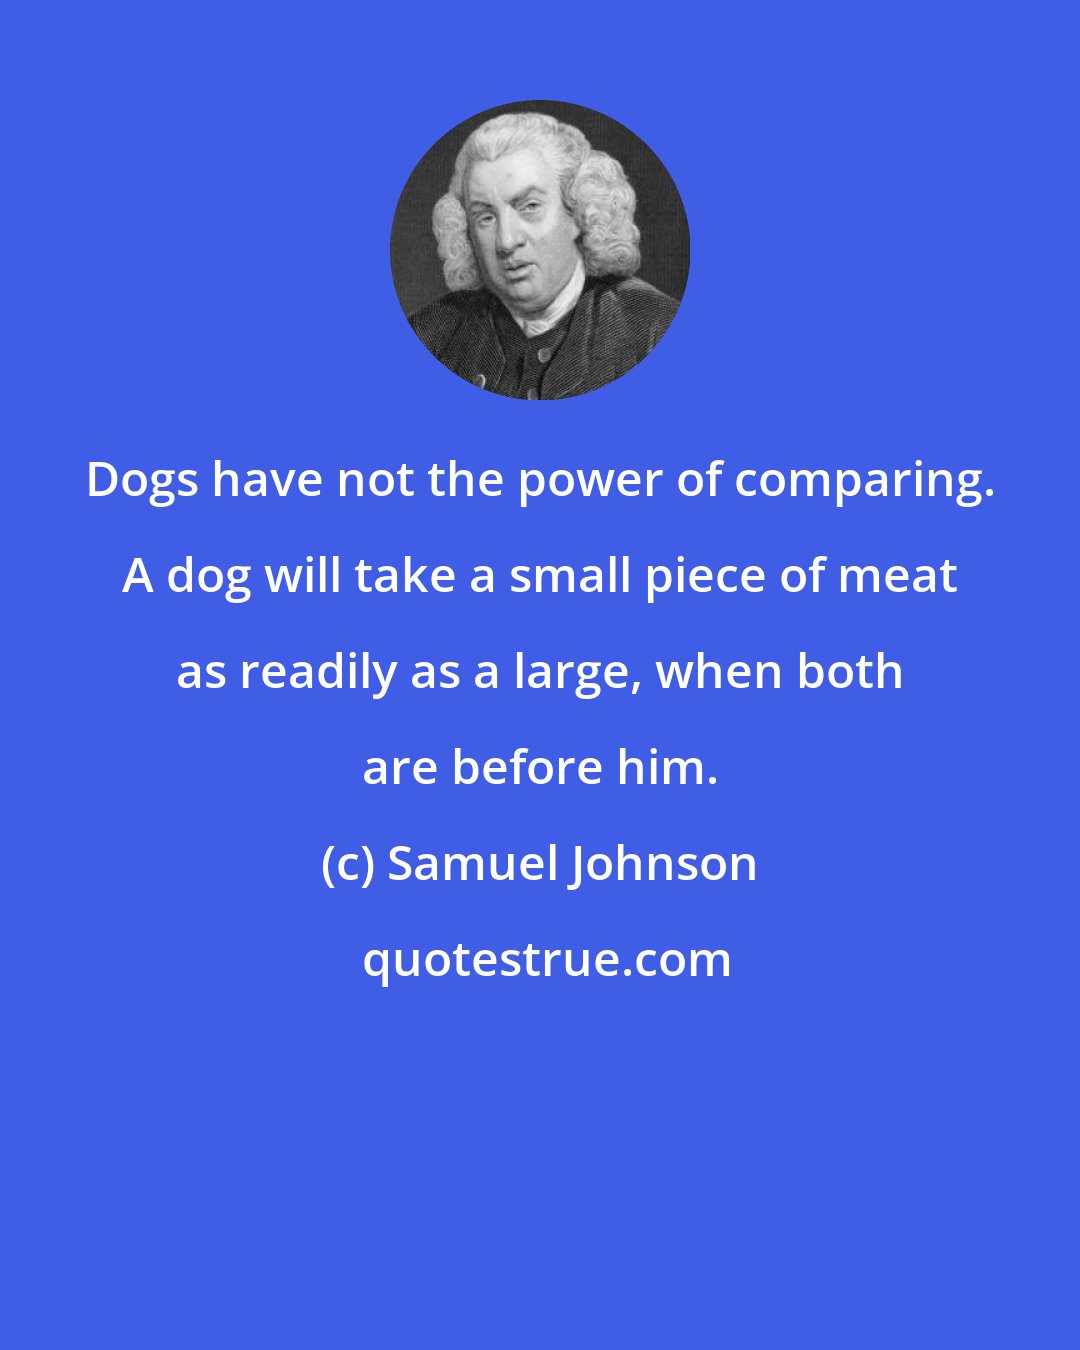 Samuel Johnson: Dogs have not the power of comparing. A dog will take a small piece of meat as readily as a large, when both are before him.